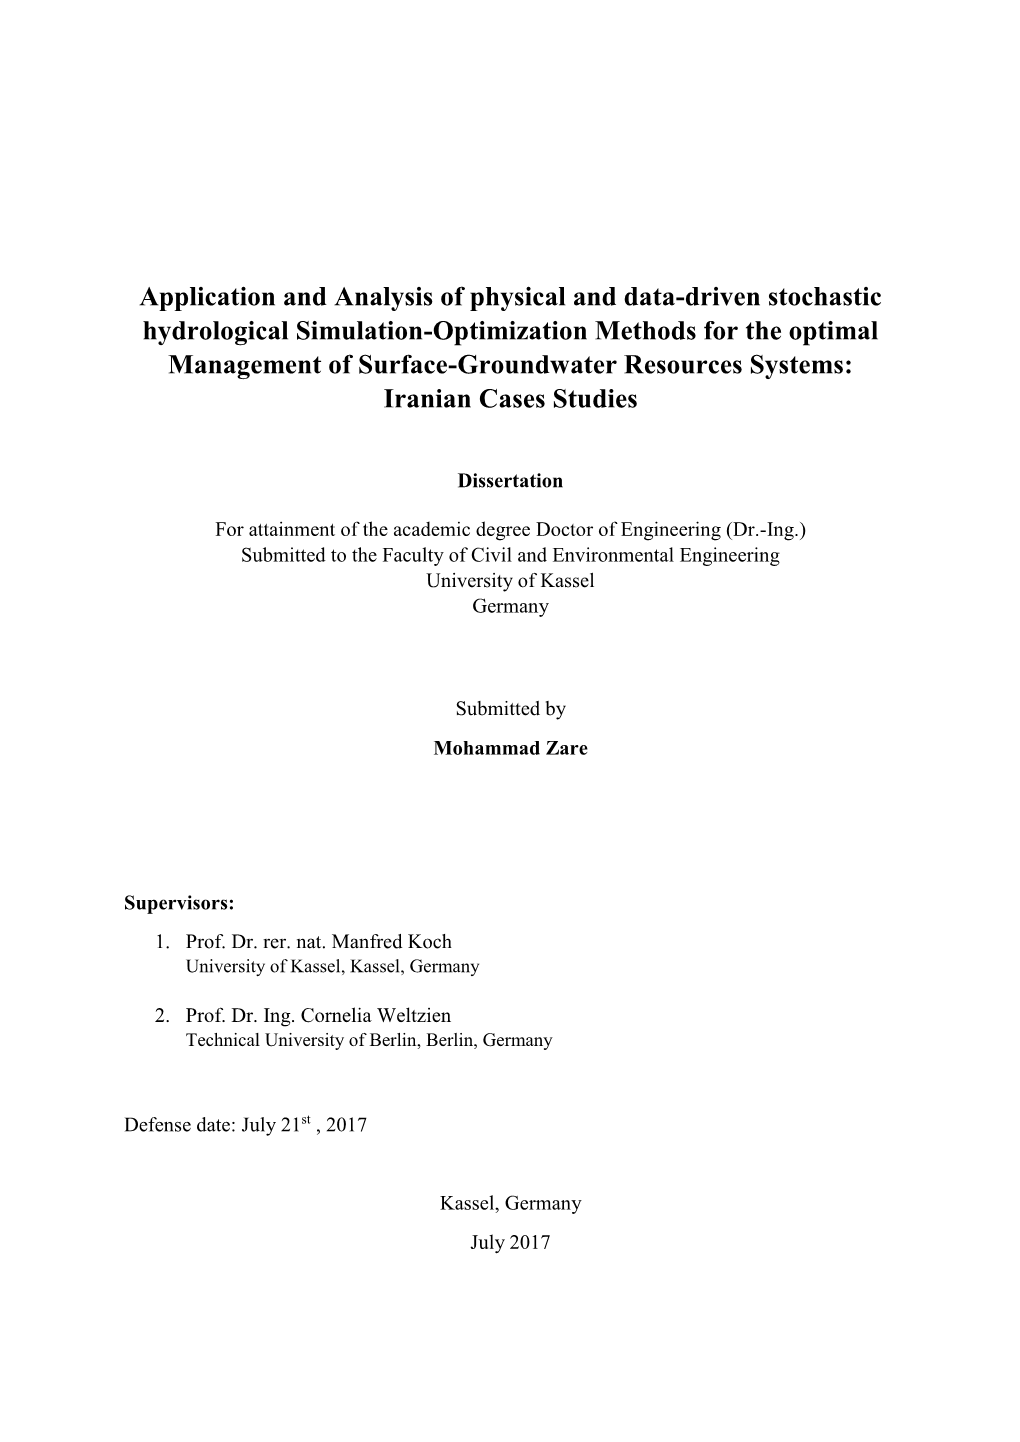 Application and Analysis of Physical and Data-Driven Stochastic